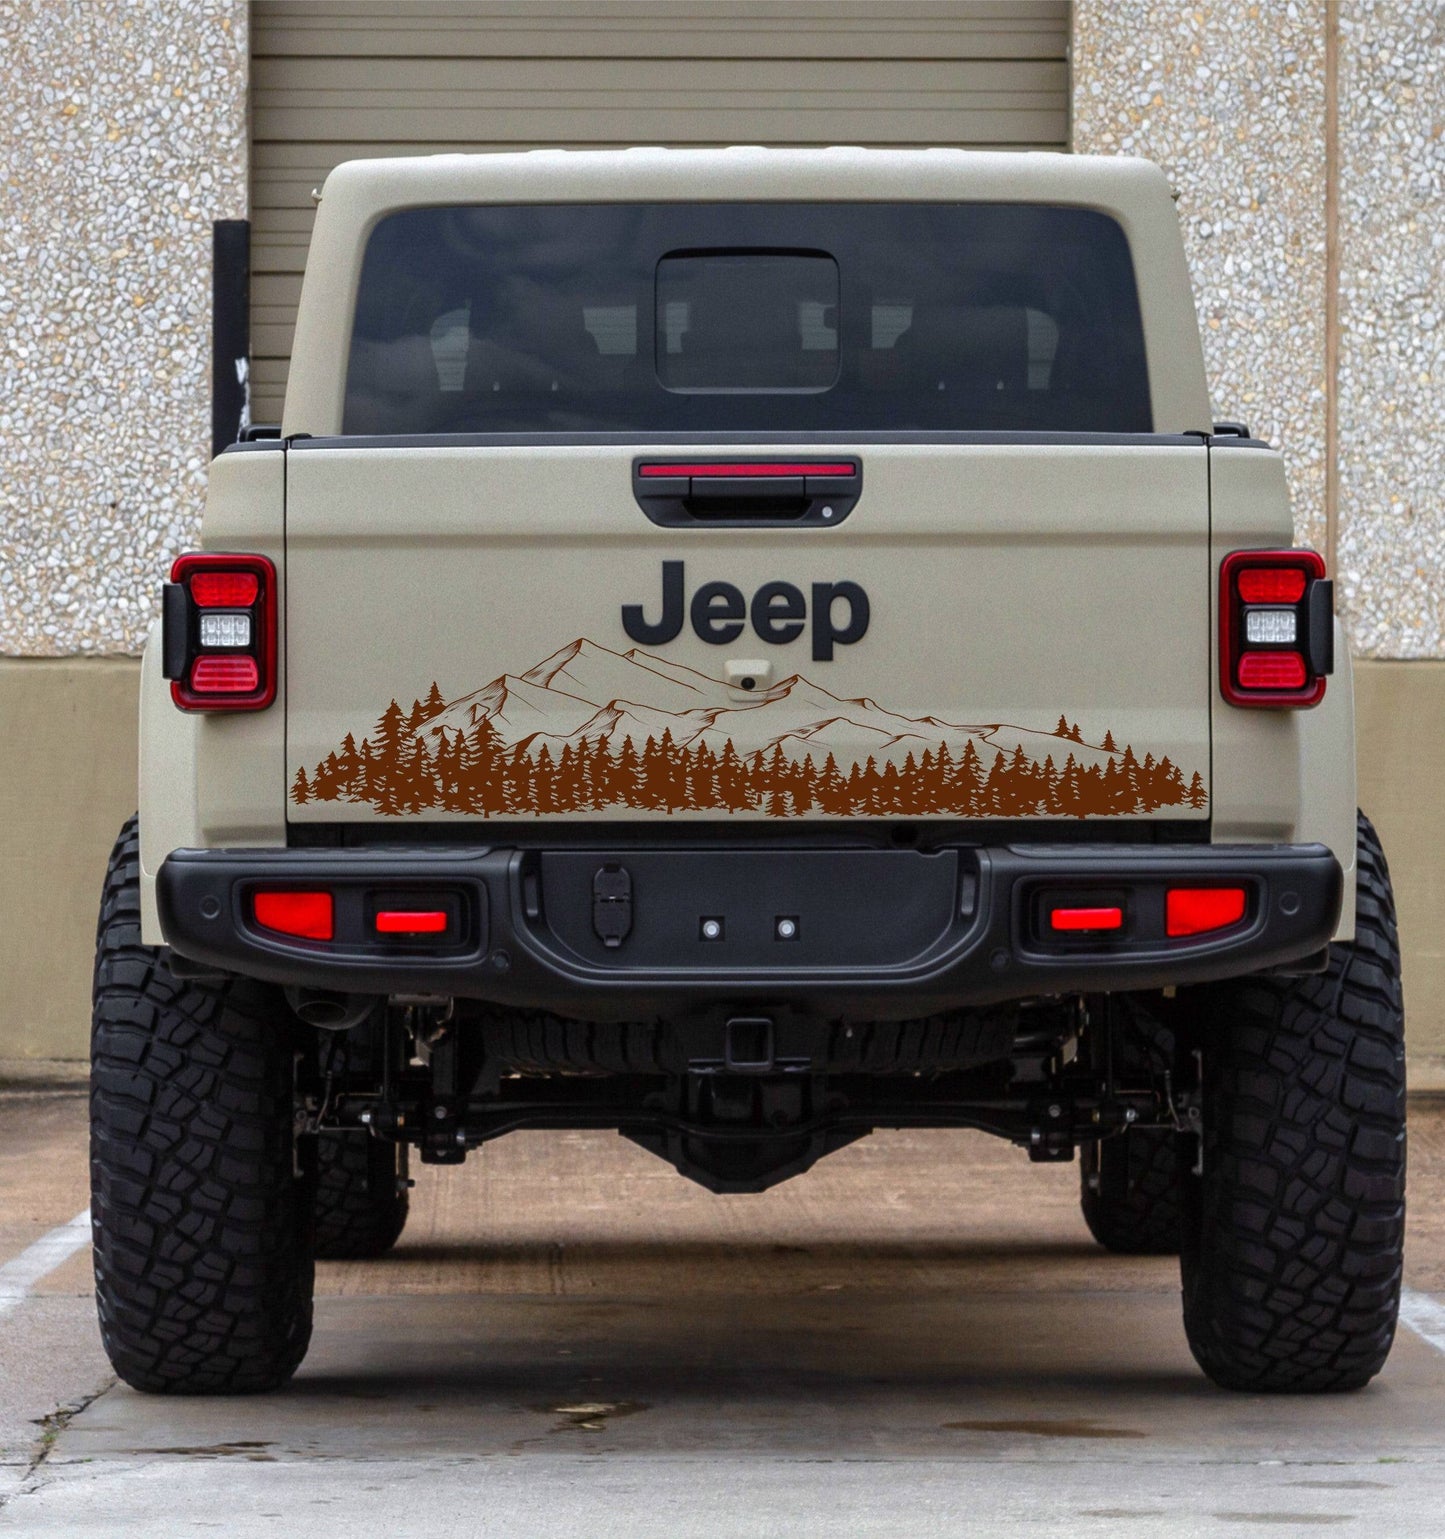 Mountain Silhouette Vinyl Decal for Jeep Gladiator Gladiator's Tailgate